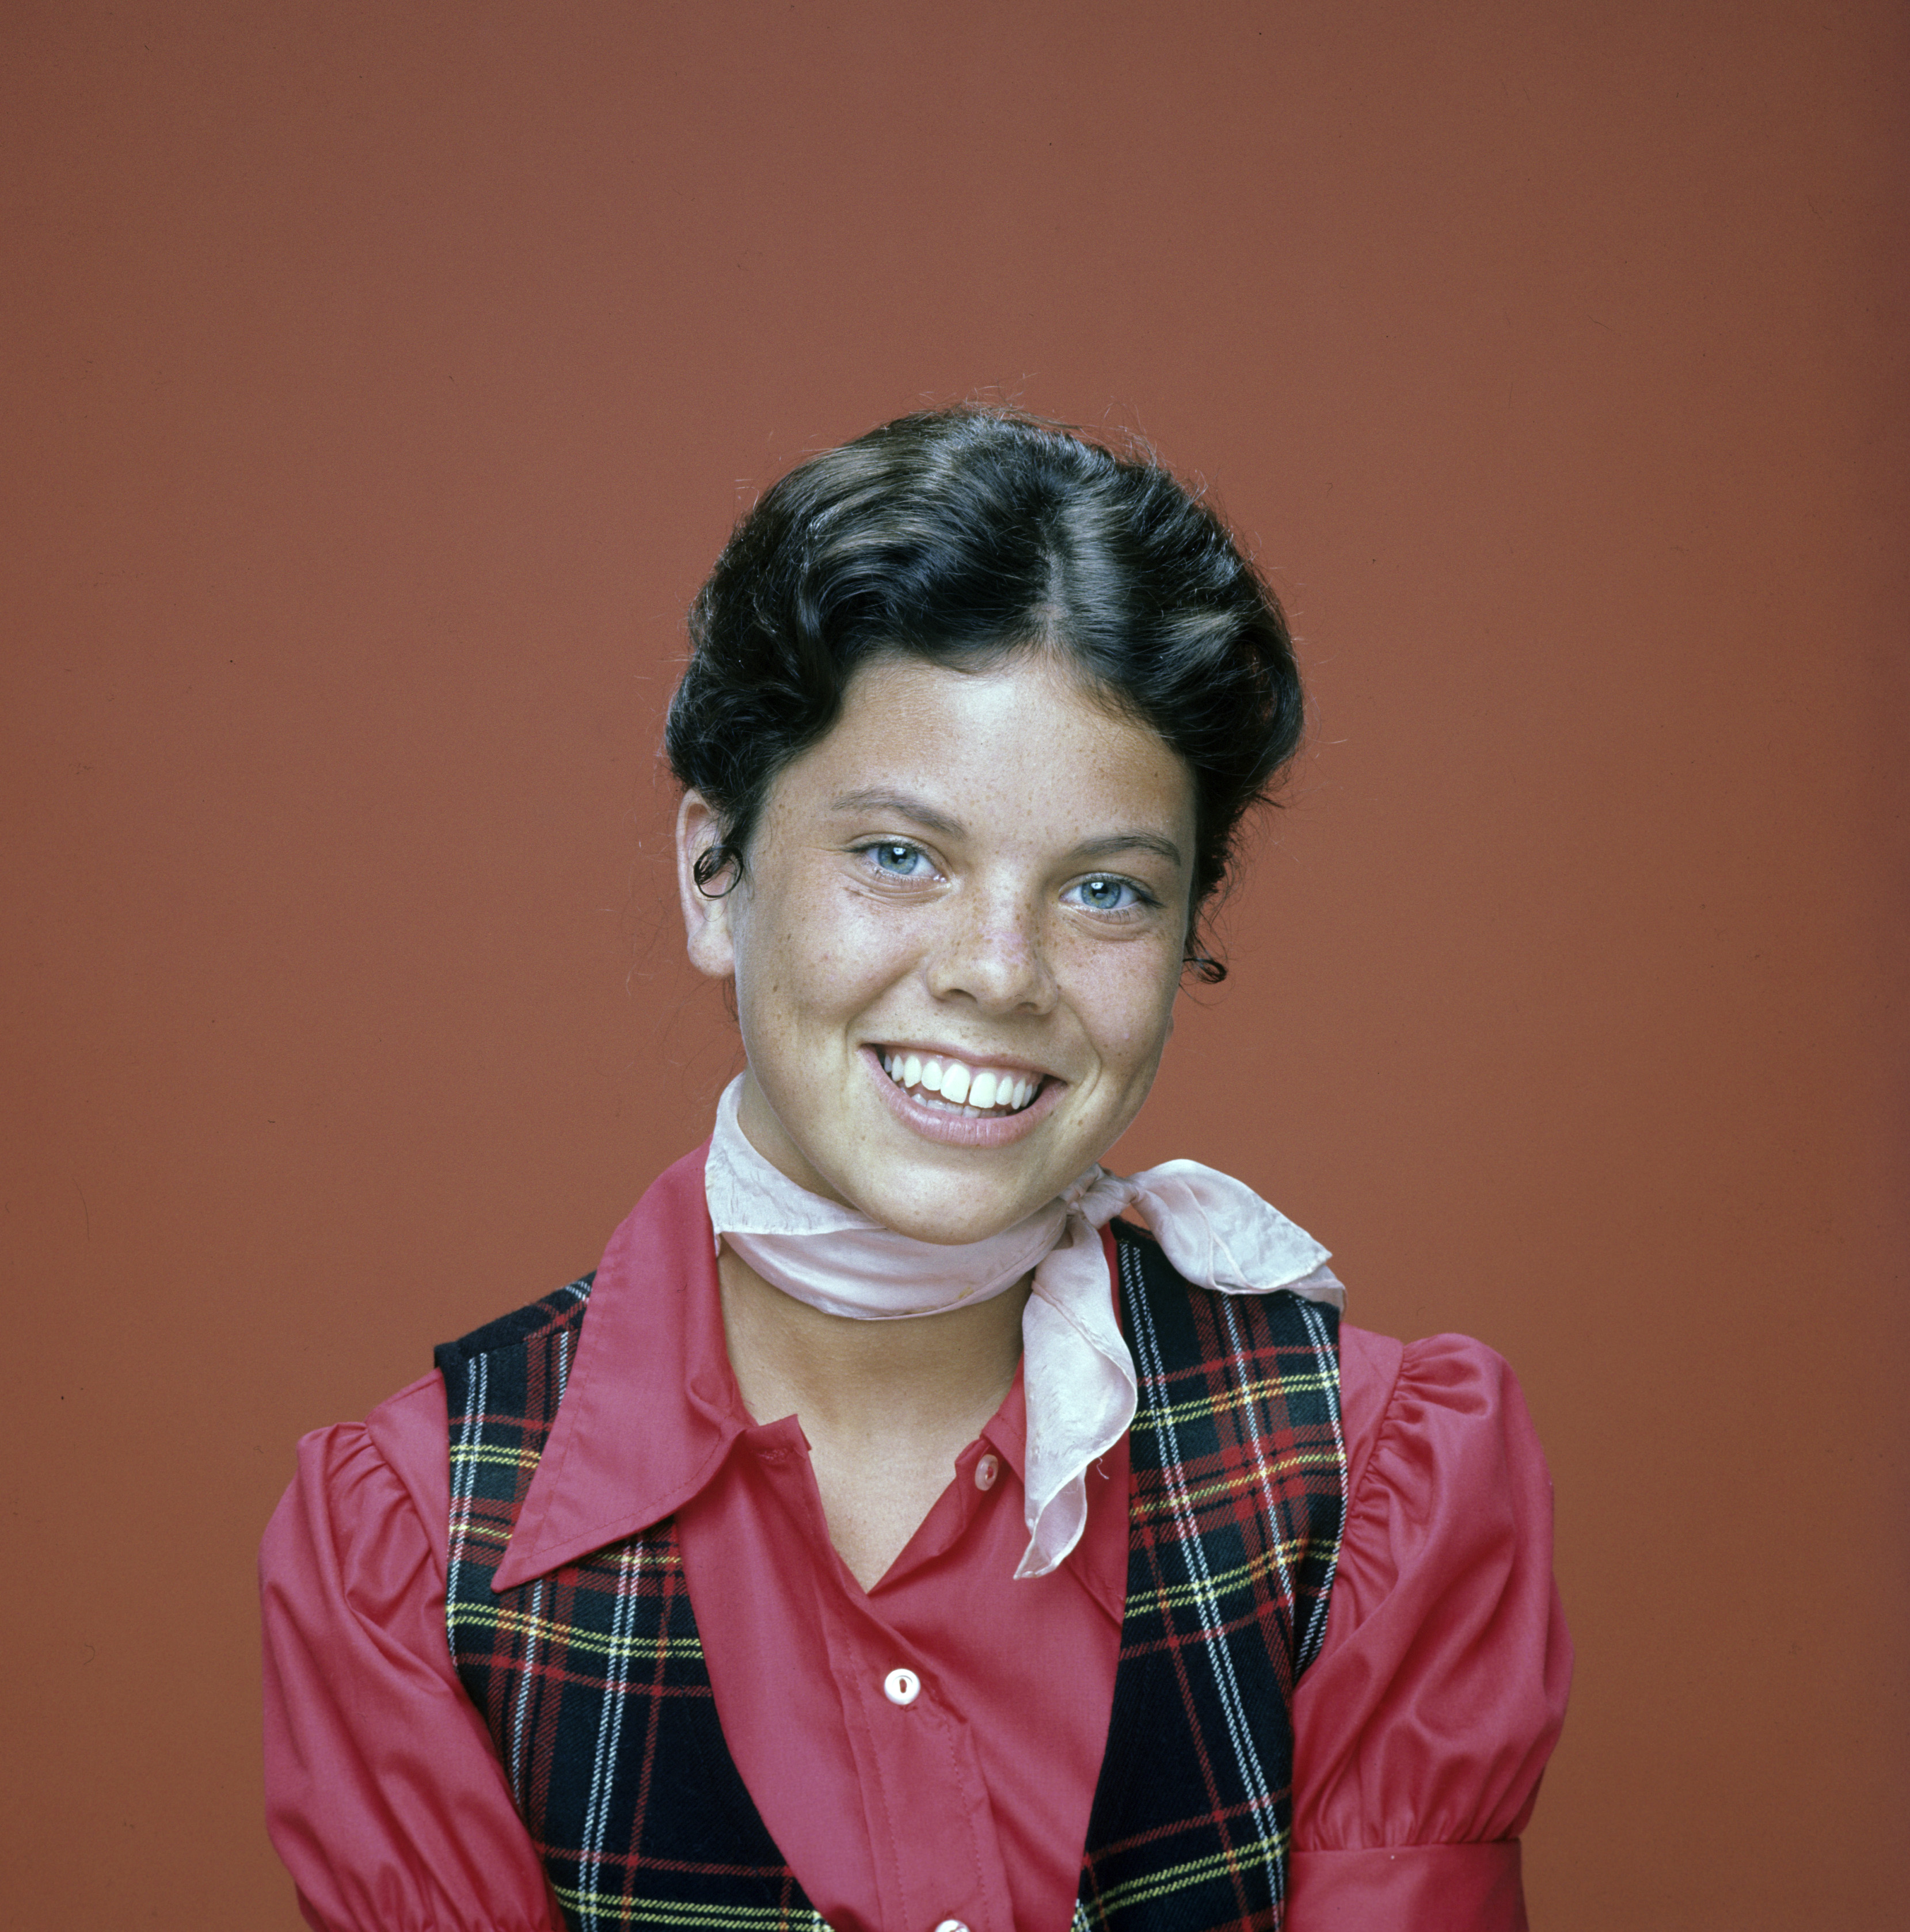 Actress Erin Moran on the set of "Happy Days" on October 7, 1975 | Source: Getty Images